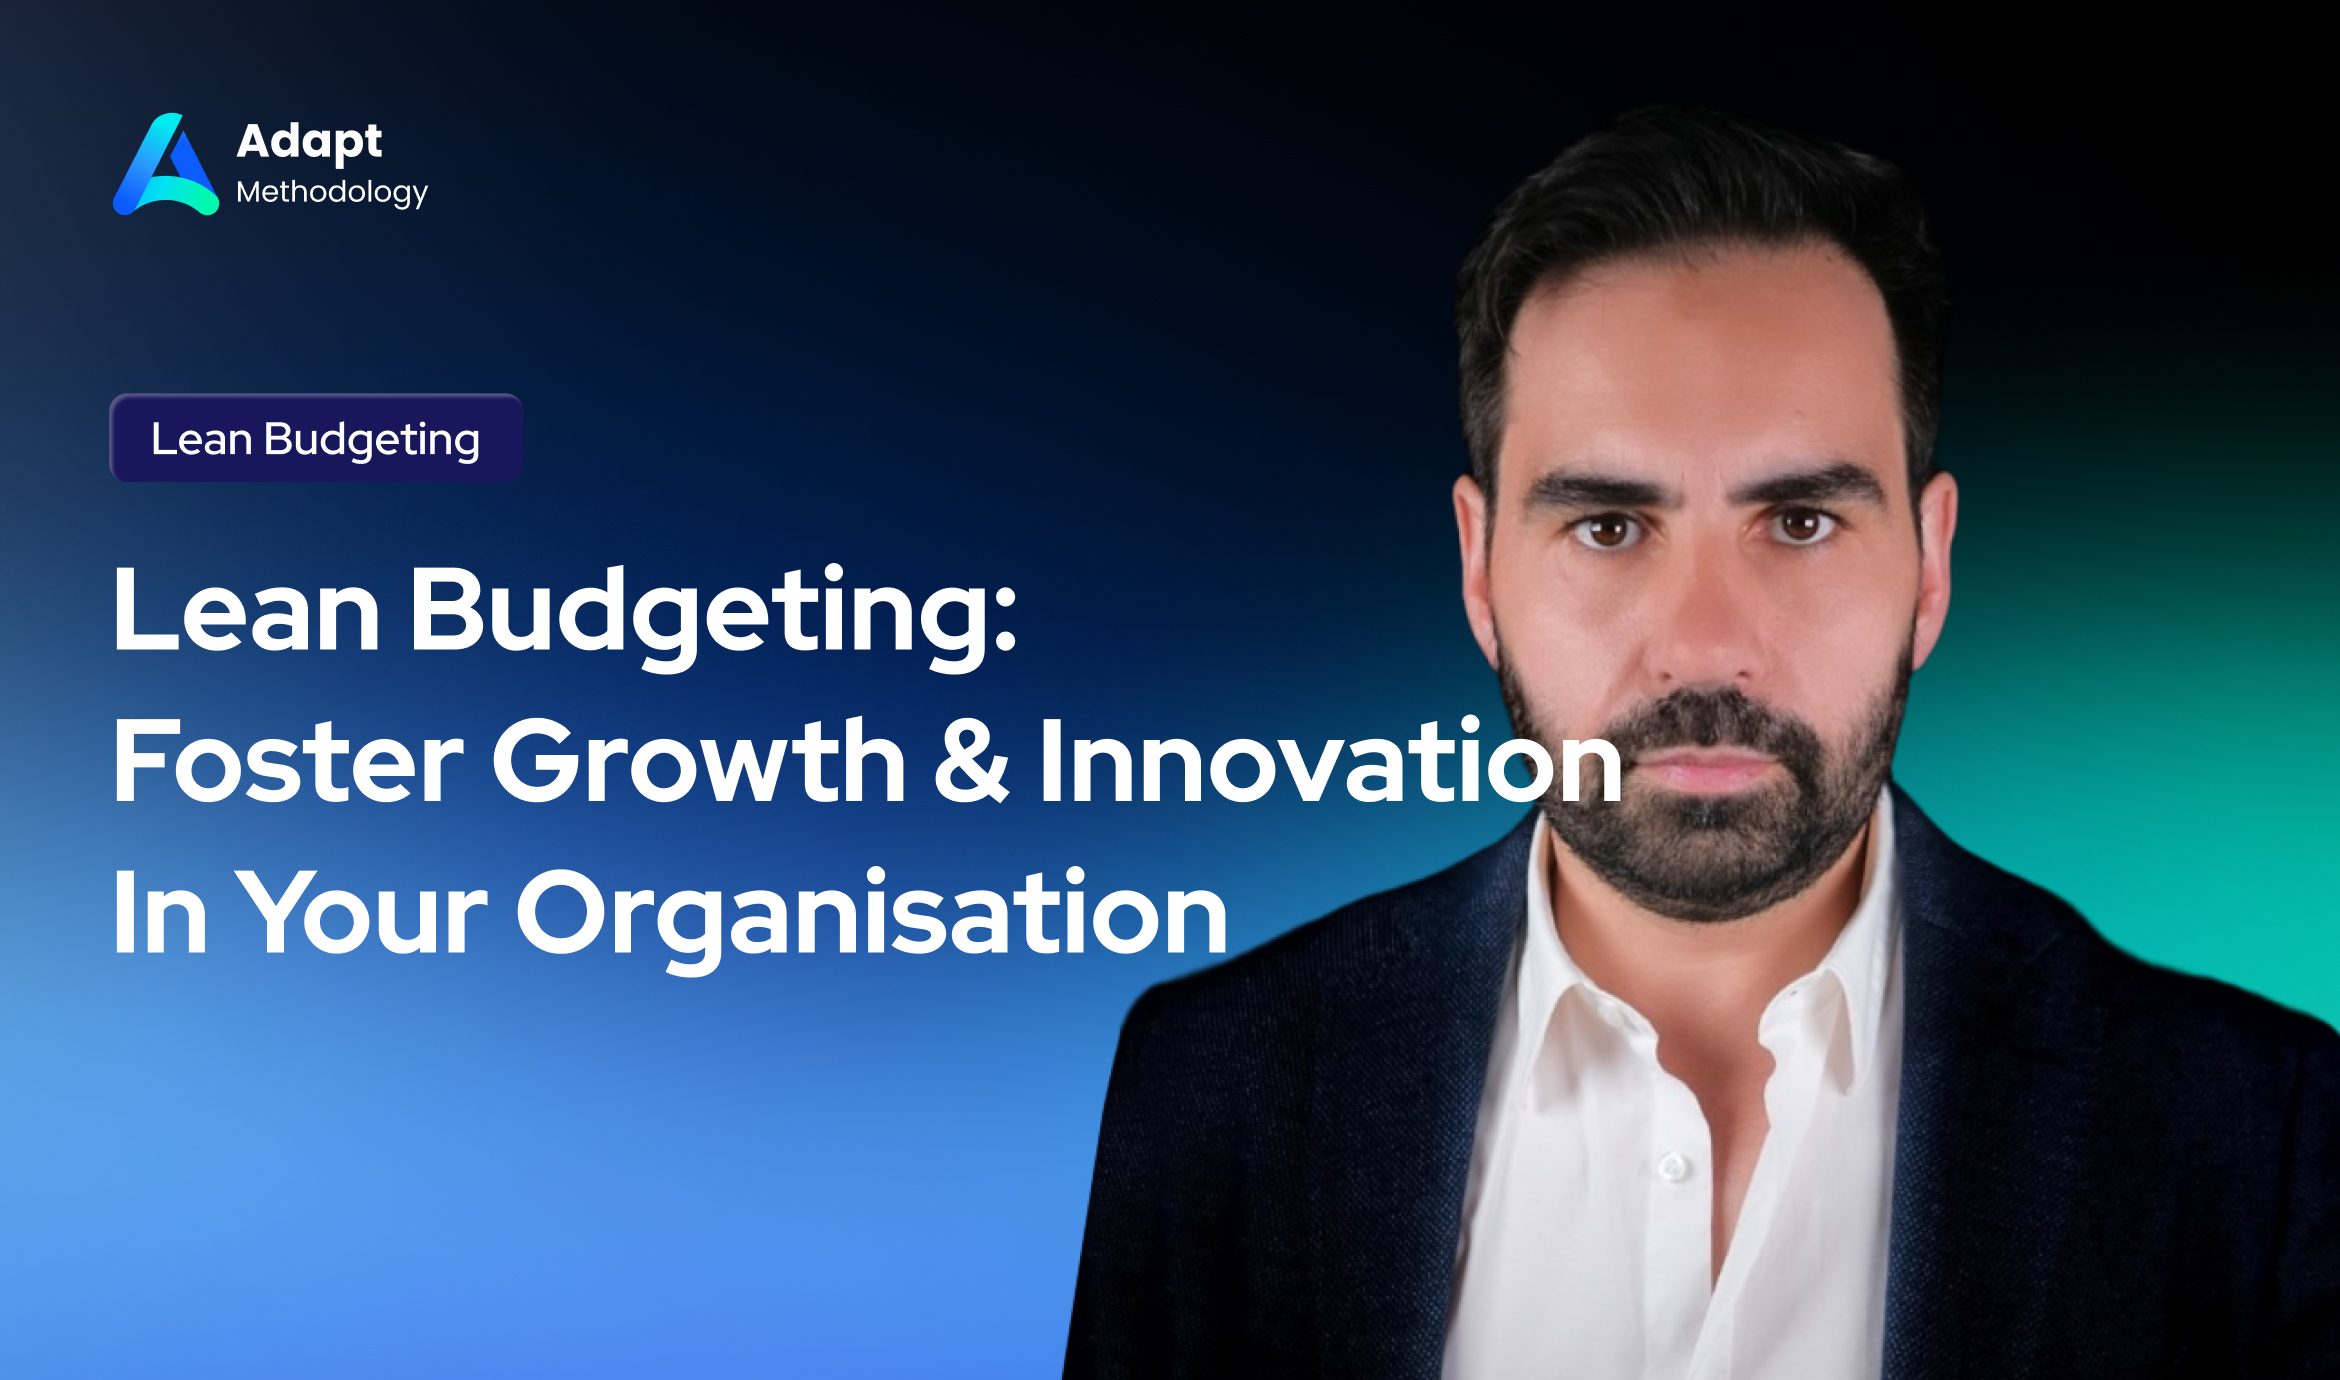 Lean Budgeting Foster Growth & Innovation In Your Organisation